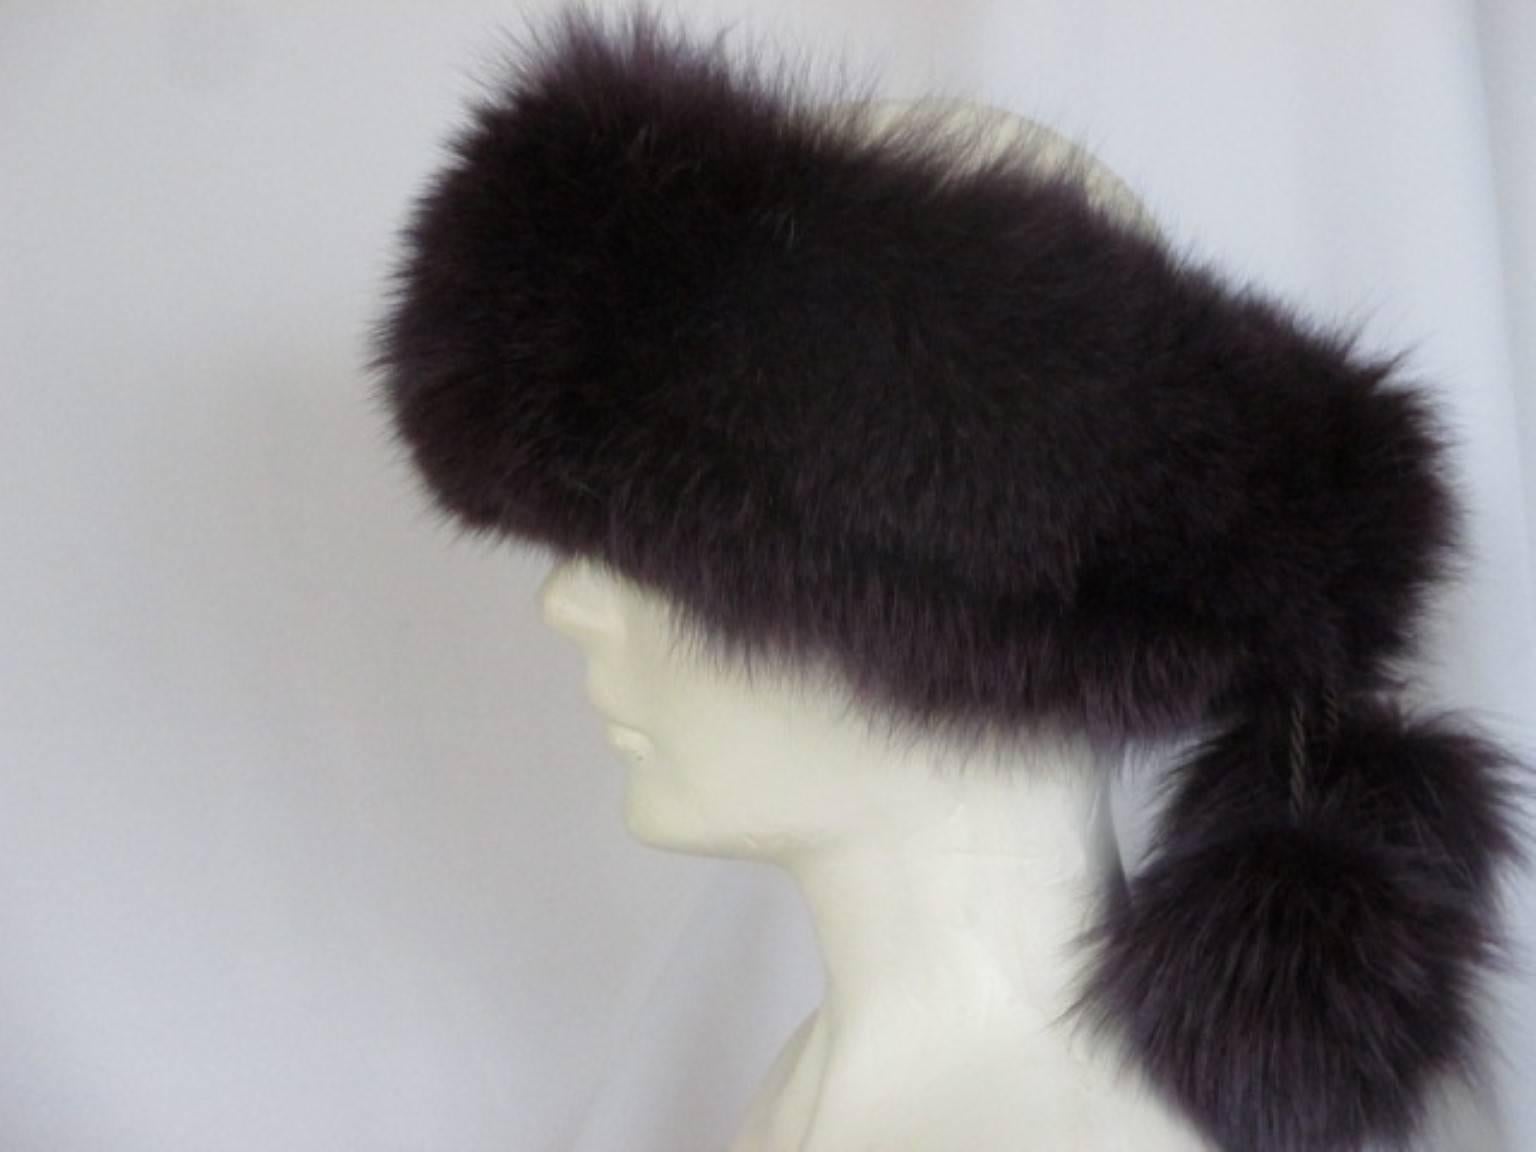 This purple headband is made of soft dyed fox fur.
Size fits like 57/58